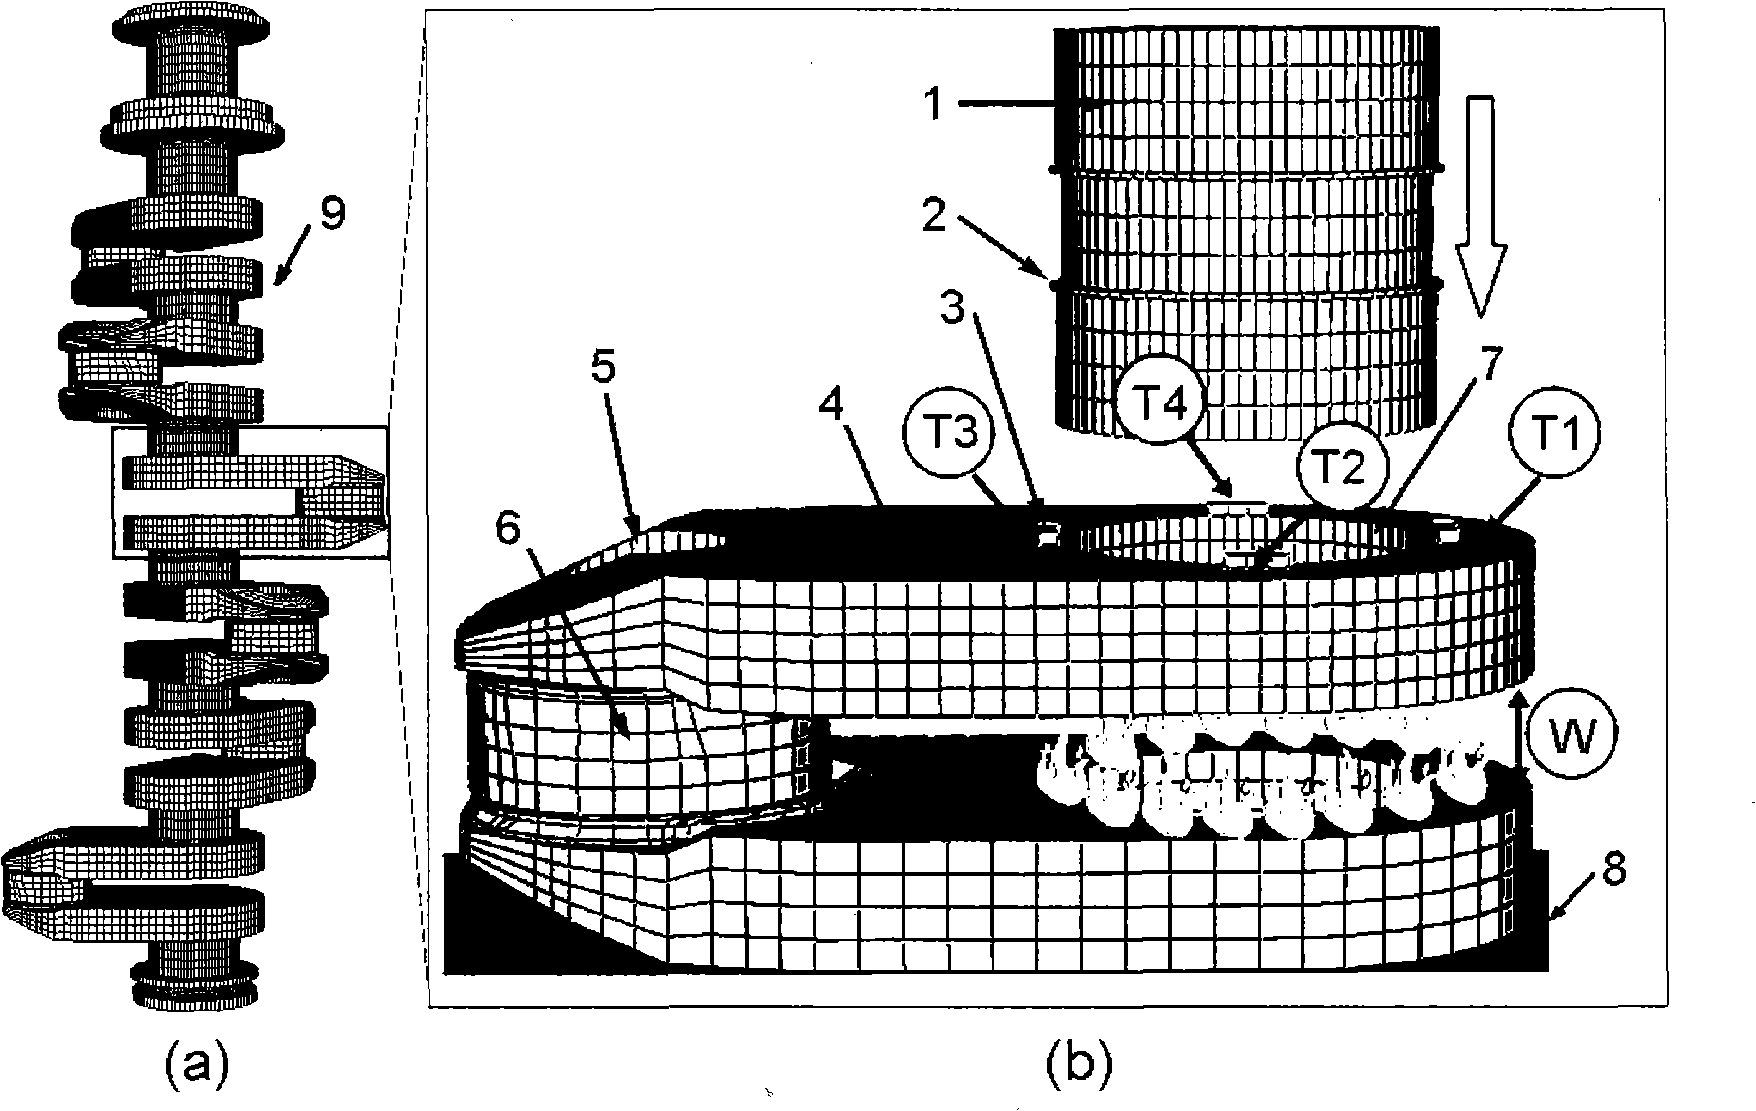 Reconfiguration method in shrinkingon process of crankshaft for studying ship and measure for preventing deformation